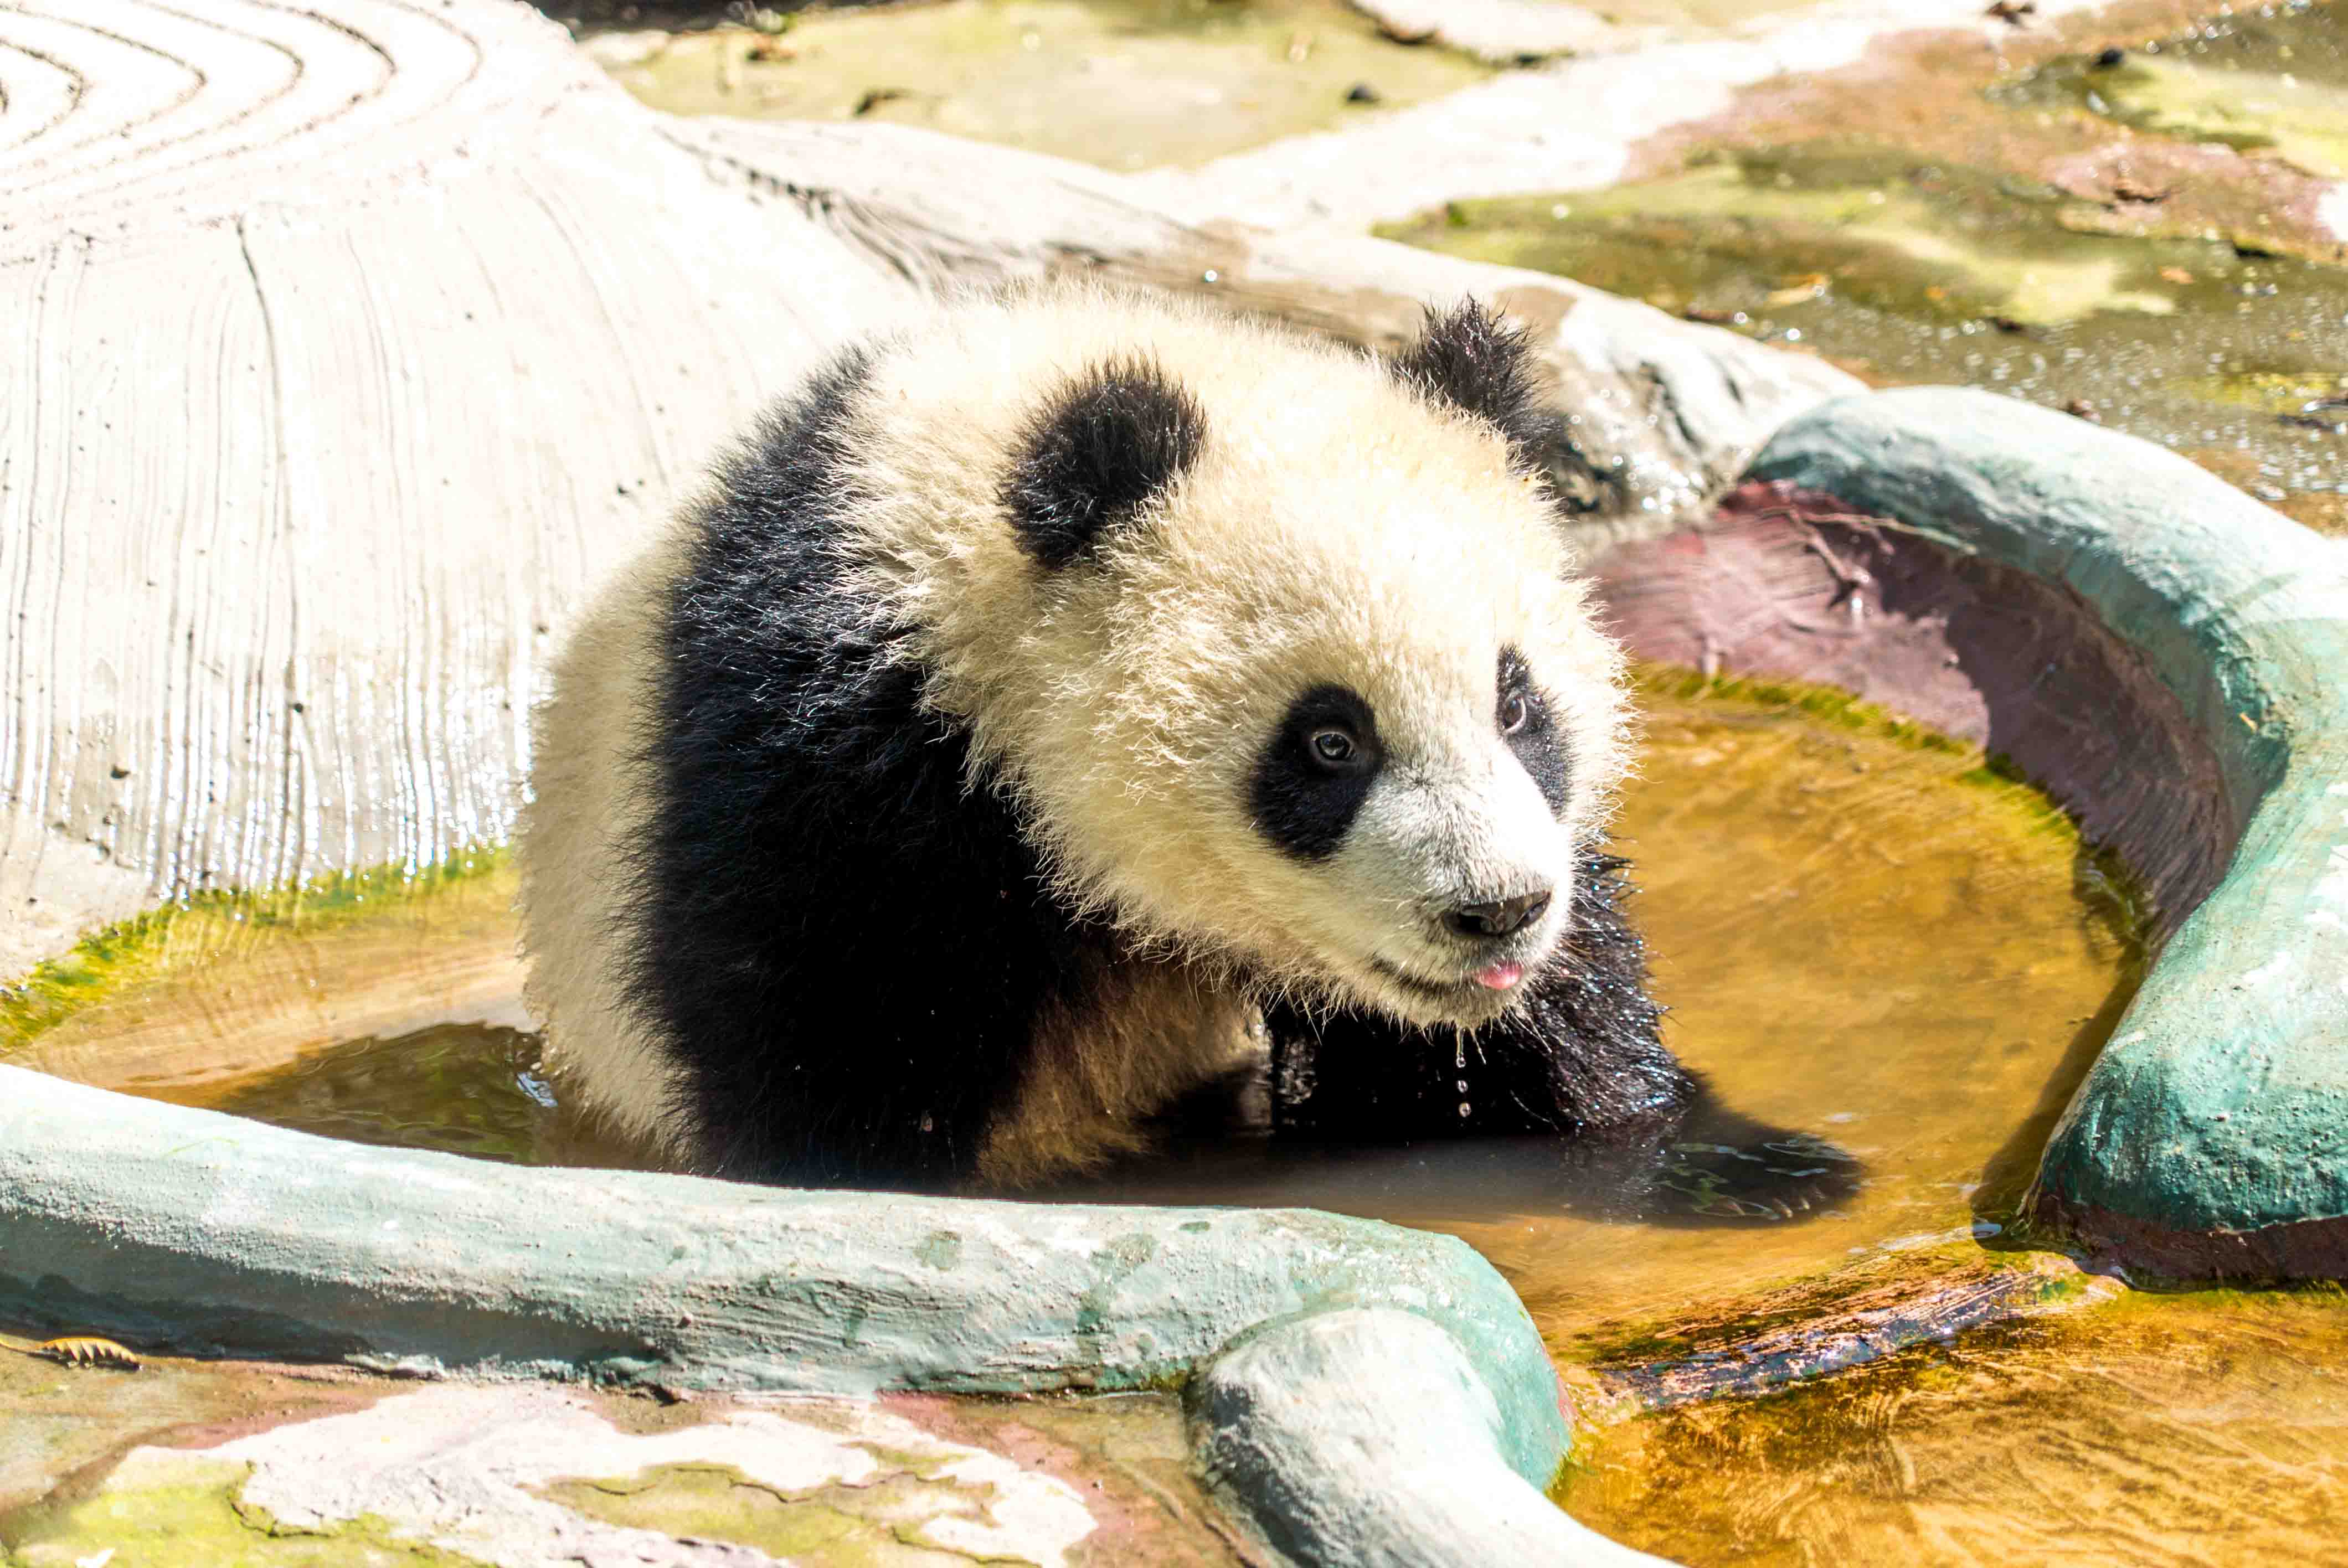 VOLUNTEERING WITH GIANT PANDAS IN CHINA | Flying The Nest